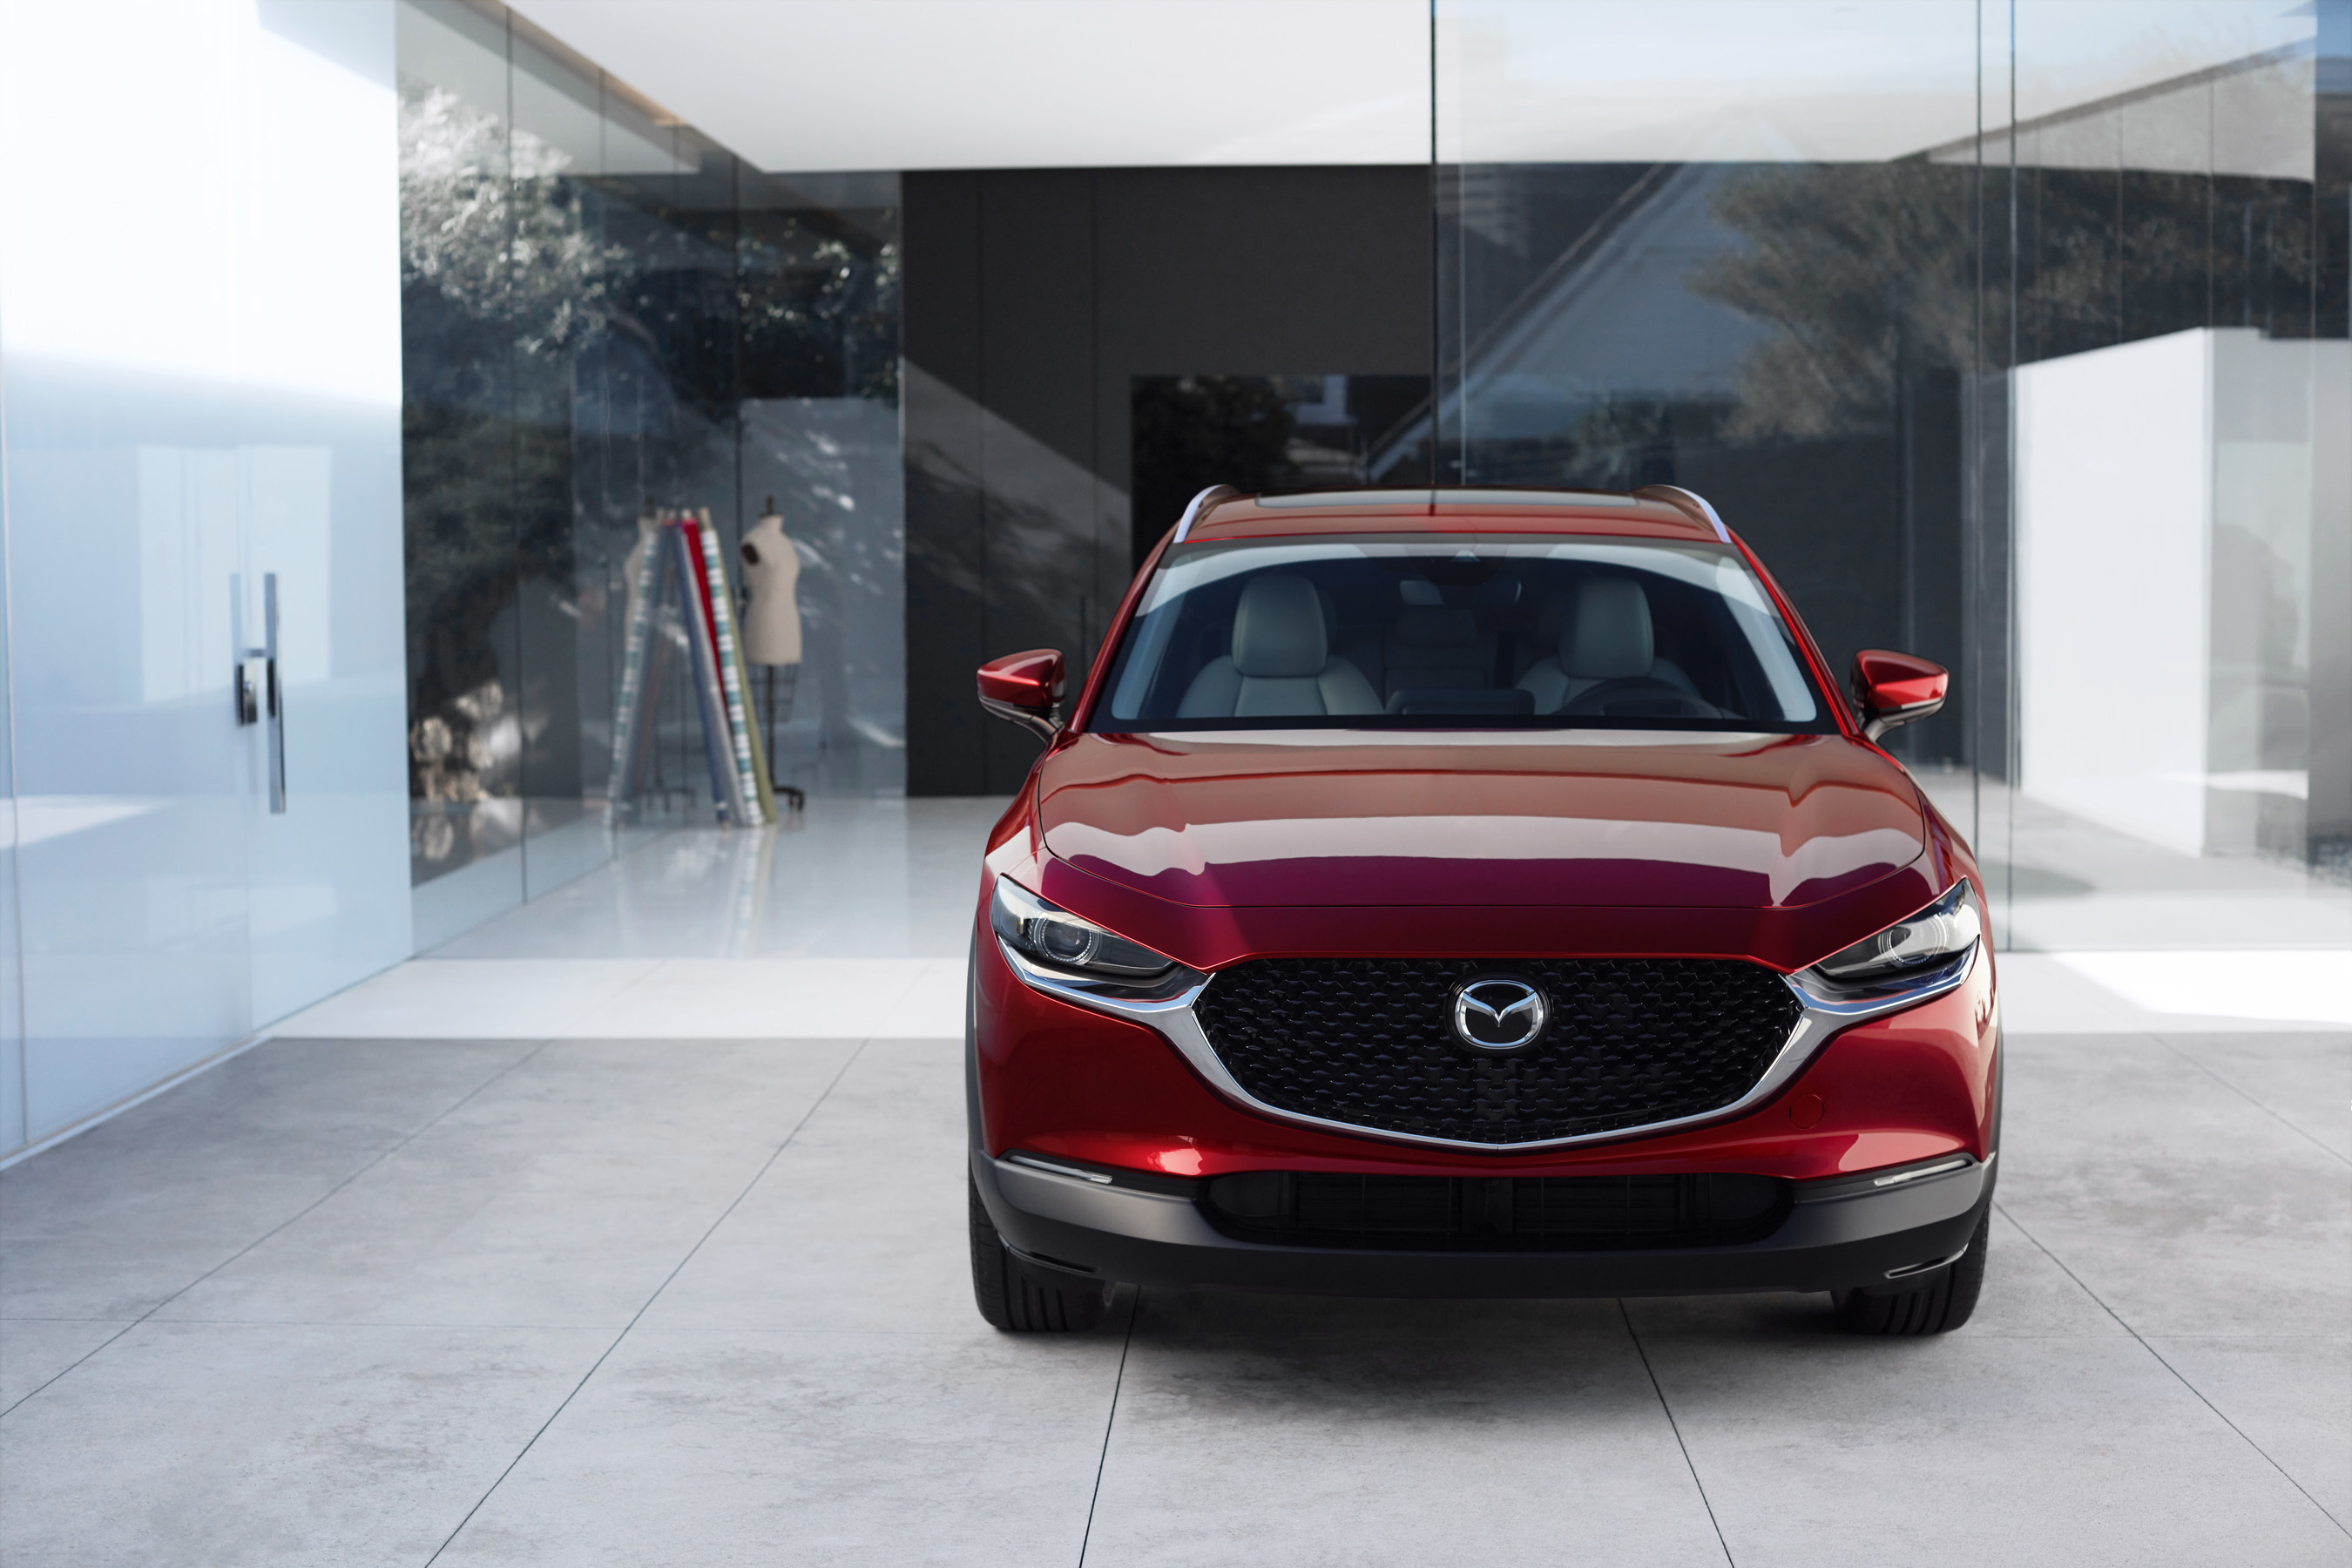 2023 Mazda CX-30: Pricing and Packaging - Oct 18, 2022